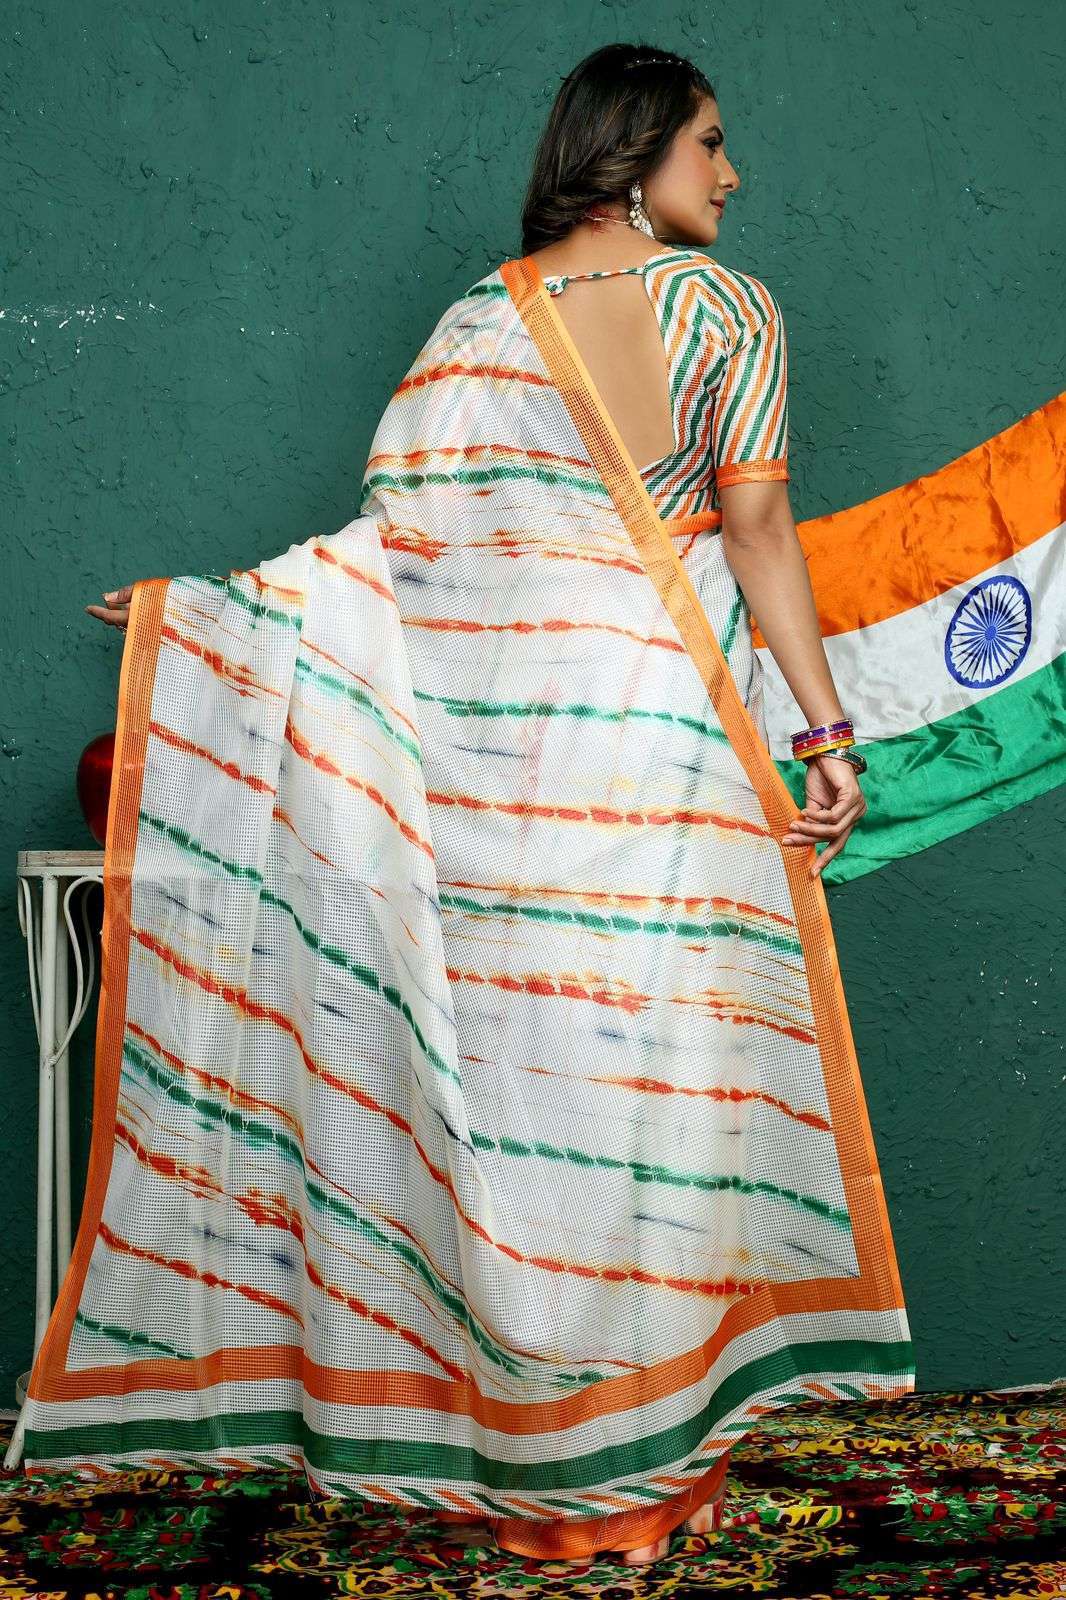 Independence Day Dress Ideas To Flaunt Your Patriotism